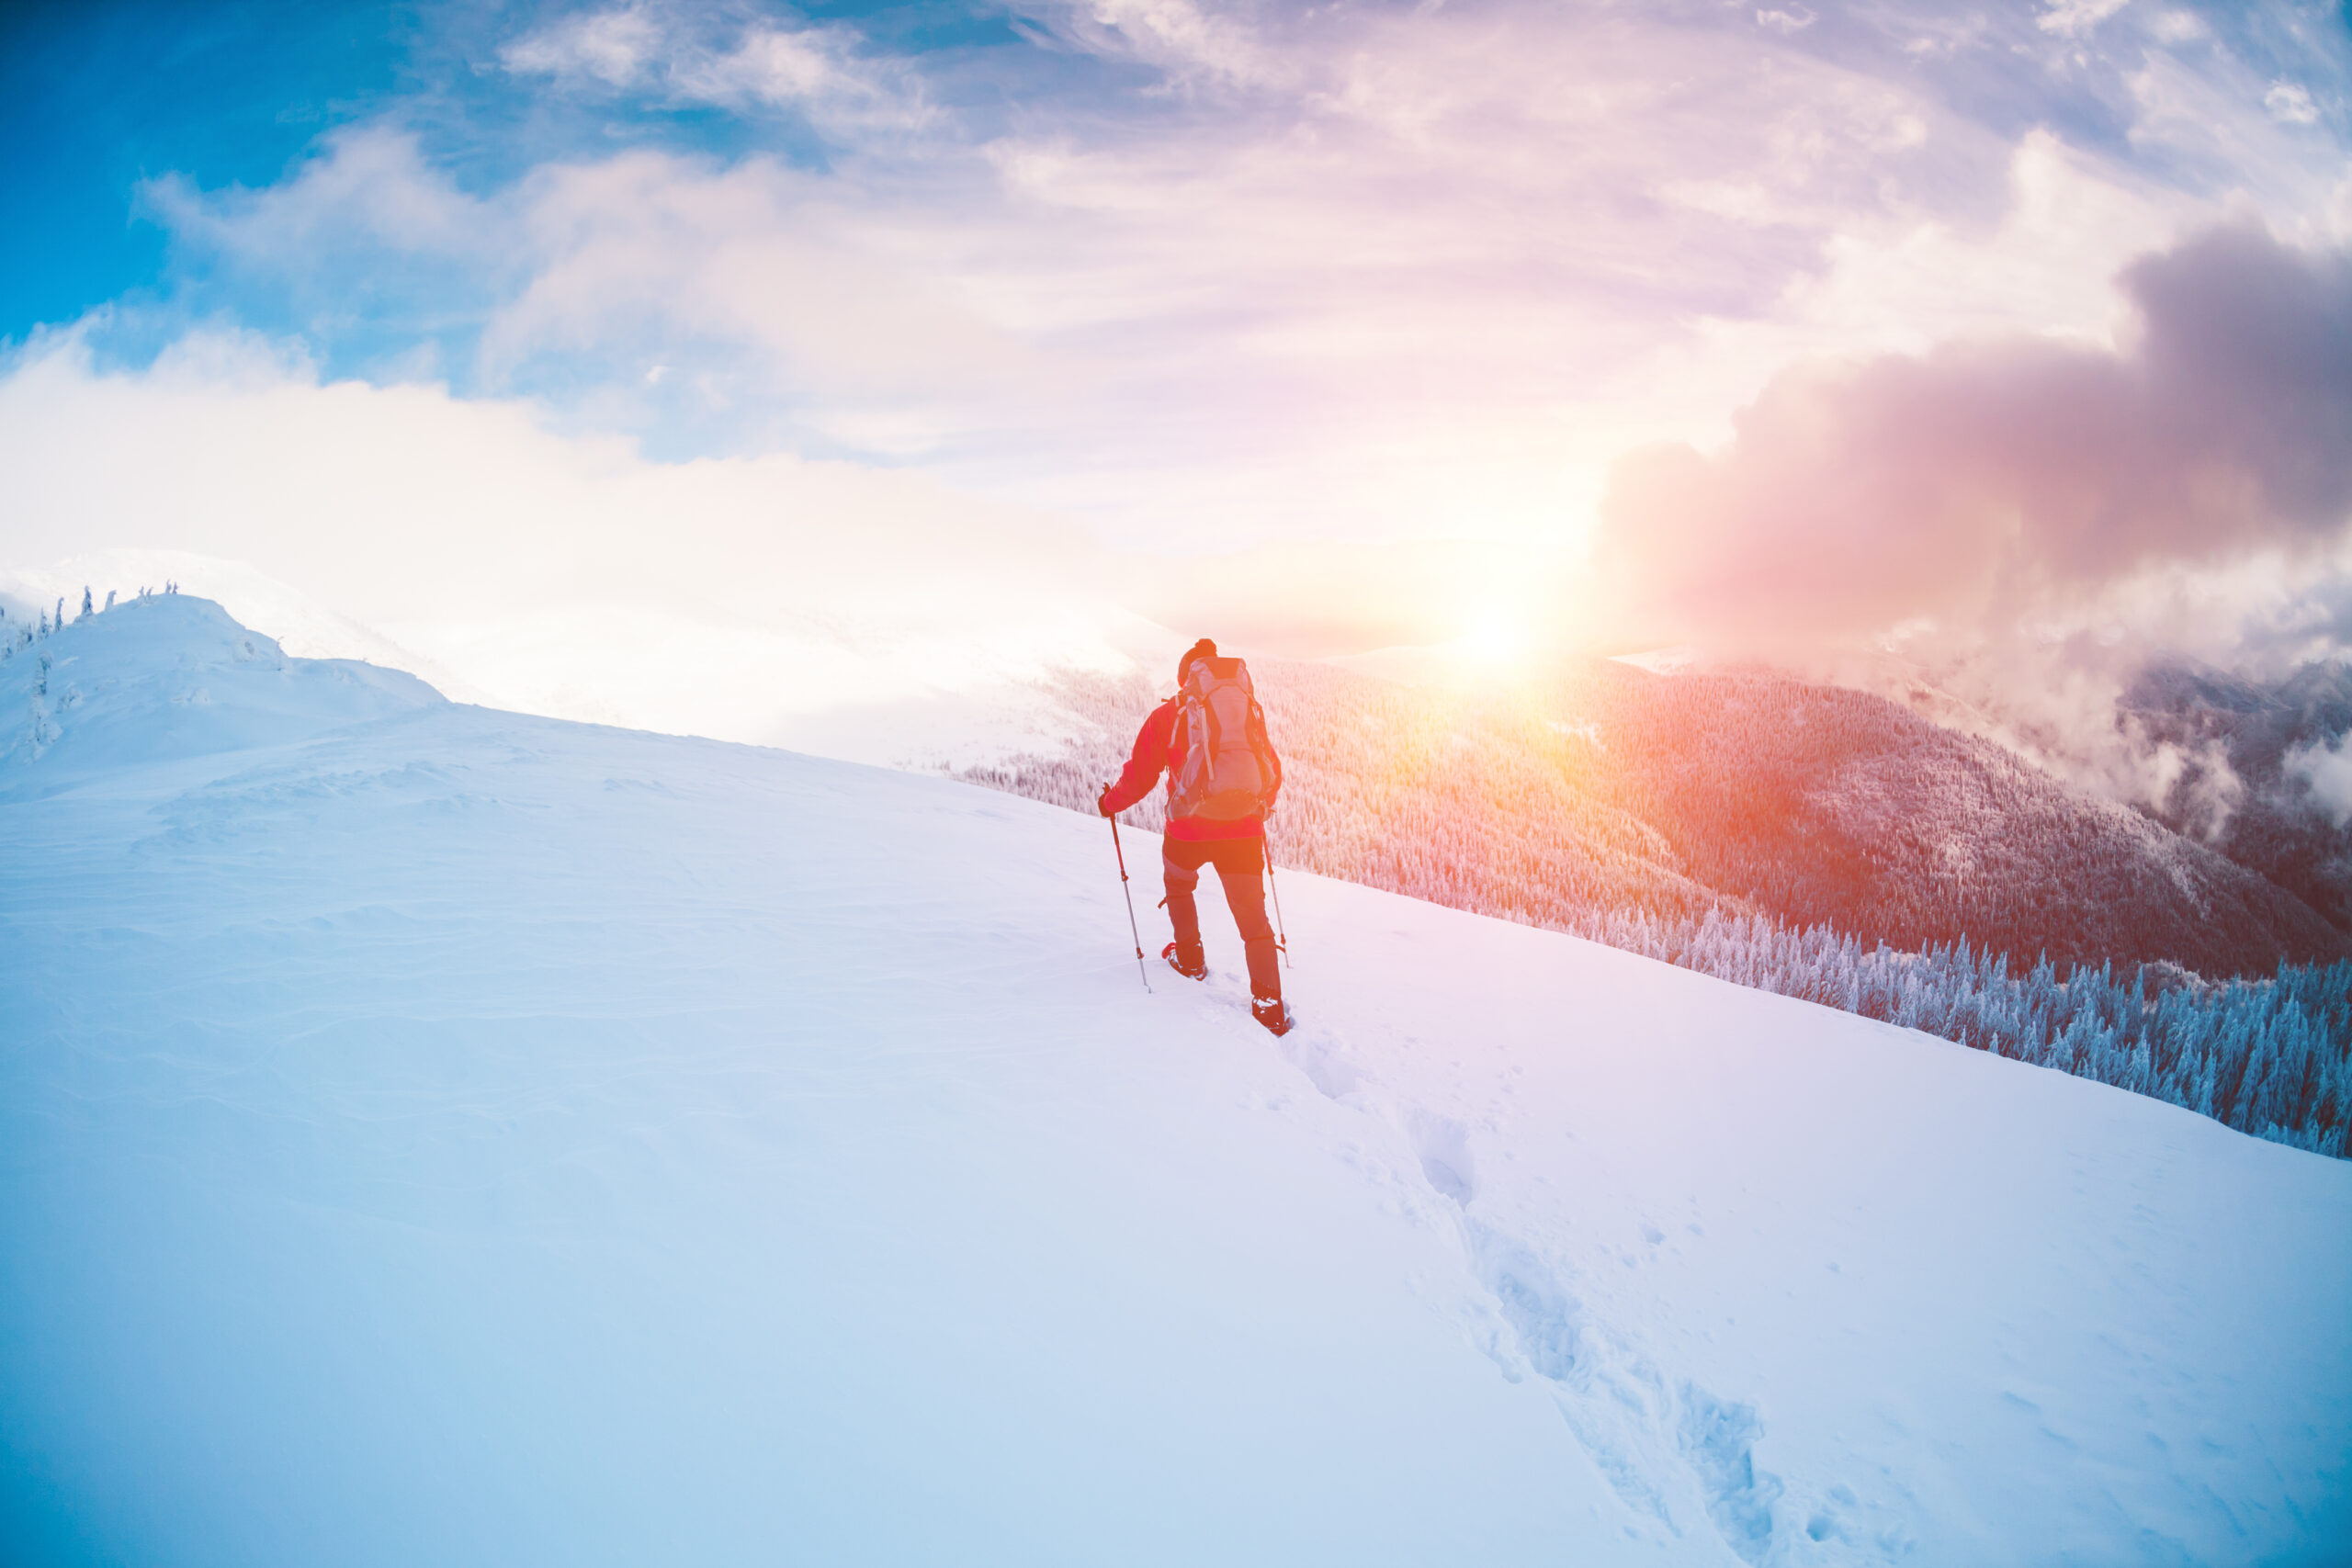 A man in snowshoes and trekking sticks in the mountains. Winter trip. Climbing of a climber against a beautiful sky with clouds. Active lifestyle. Climbing the mountain through the snow.